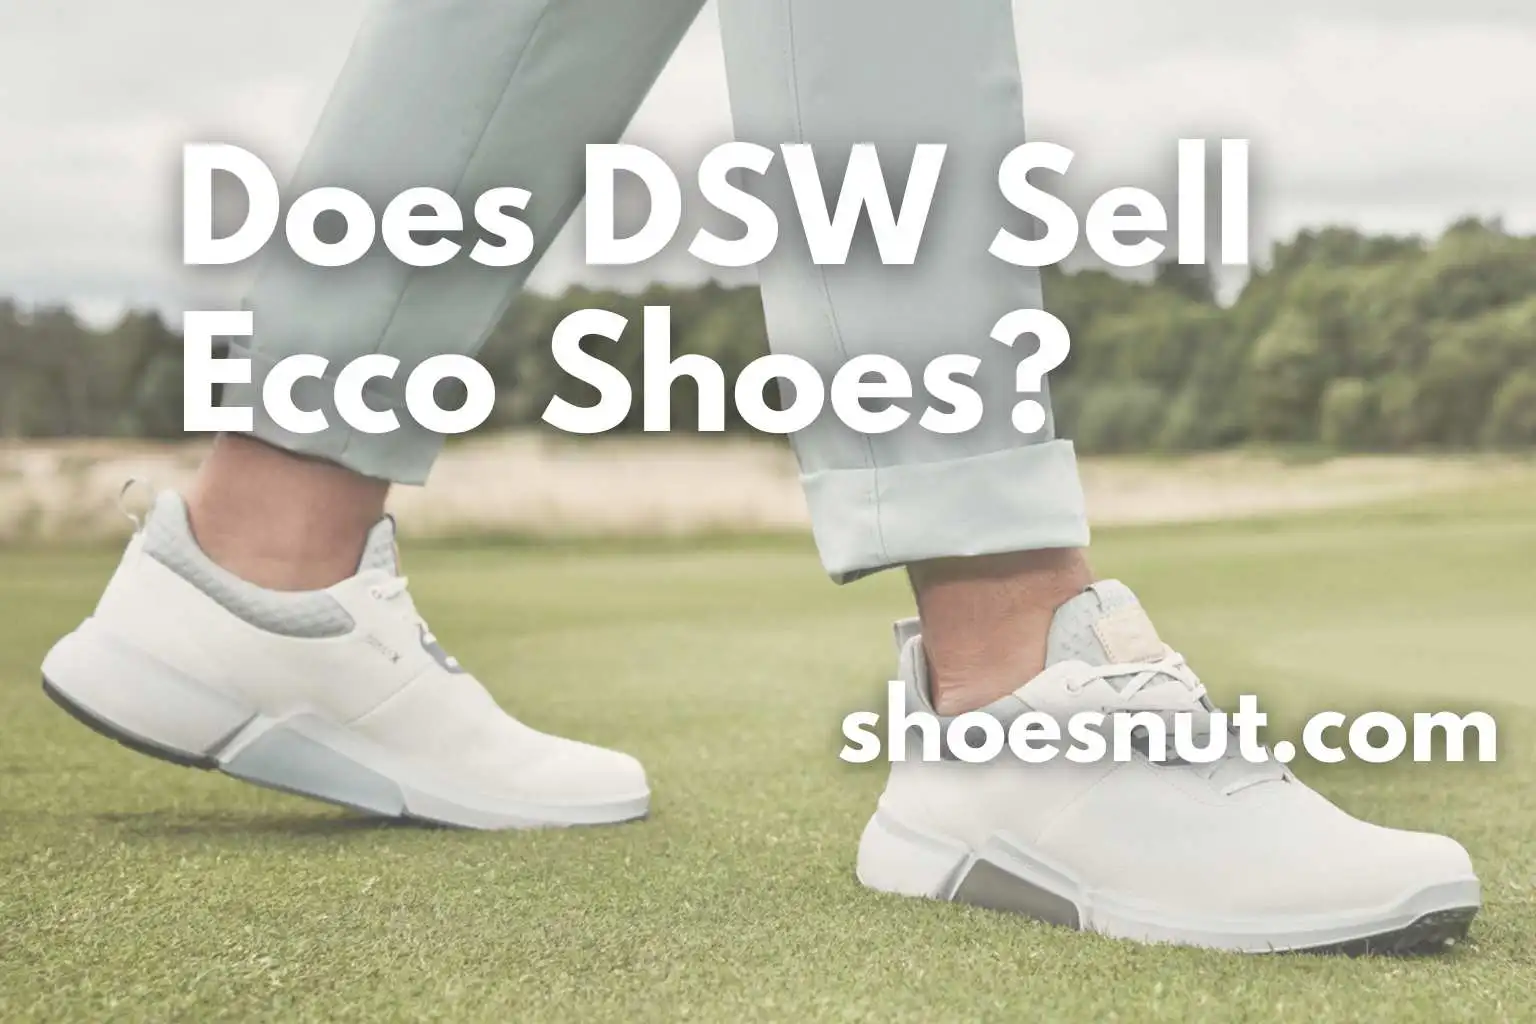 Does DSW Sell Ecco Shoes?